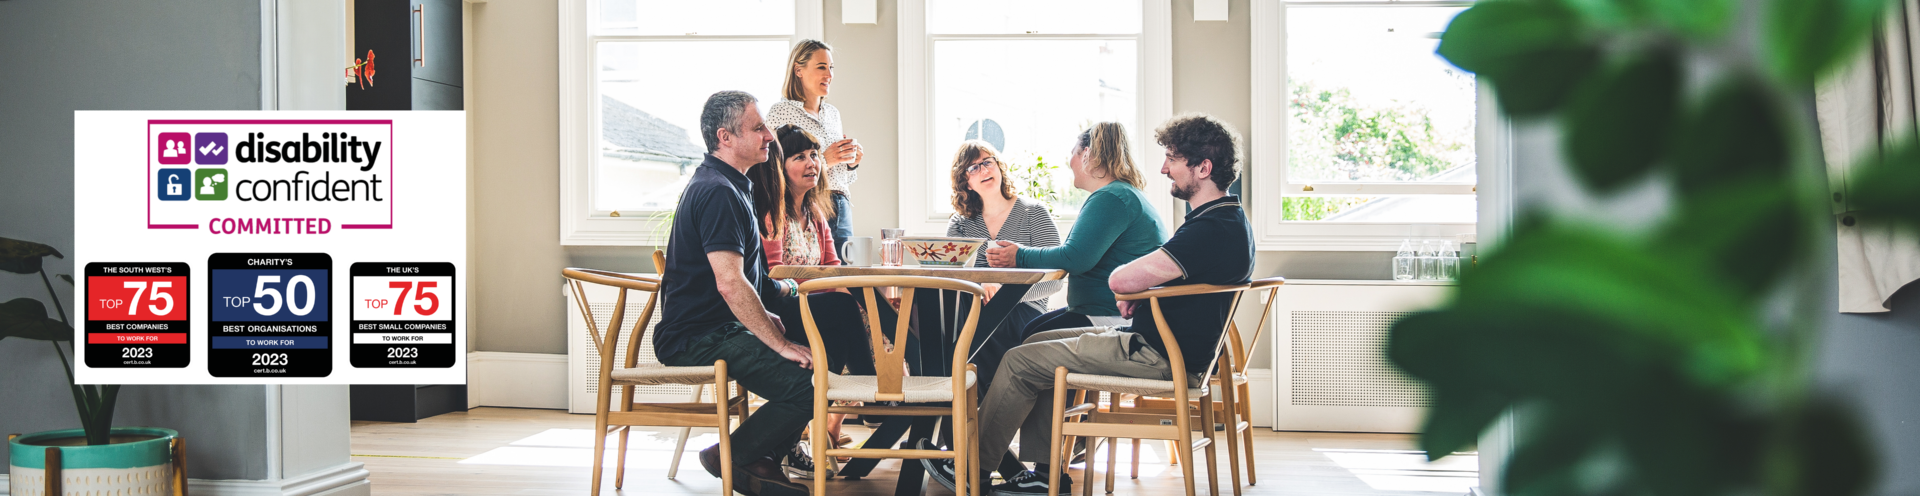 Photograph of Barnwood staff, having lunch in the kitchen on a bright sunny day. There are four logos to the left side, including Disability Confident Committed, The South West Top 25 Best companies to work for, 2023, Charity's Top 10 Best Organisations to work for, 2023 and The UK's Top 25 Best Small Companies to work for, 2023.